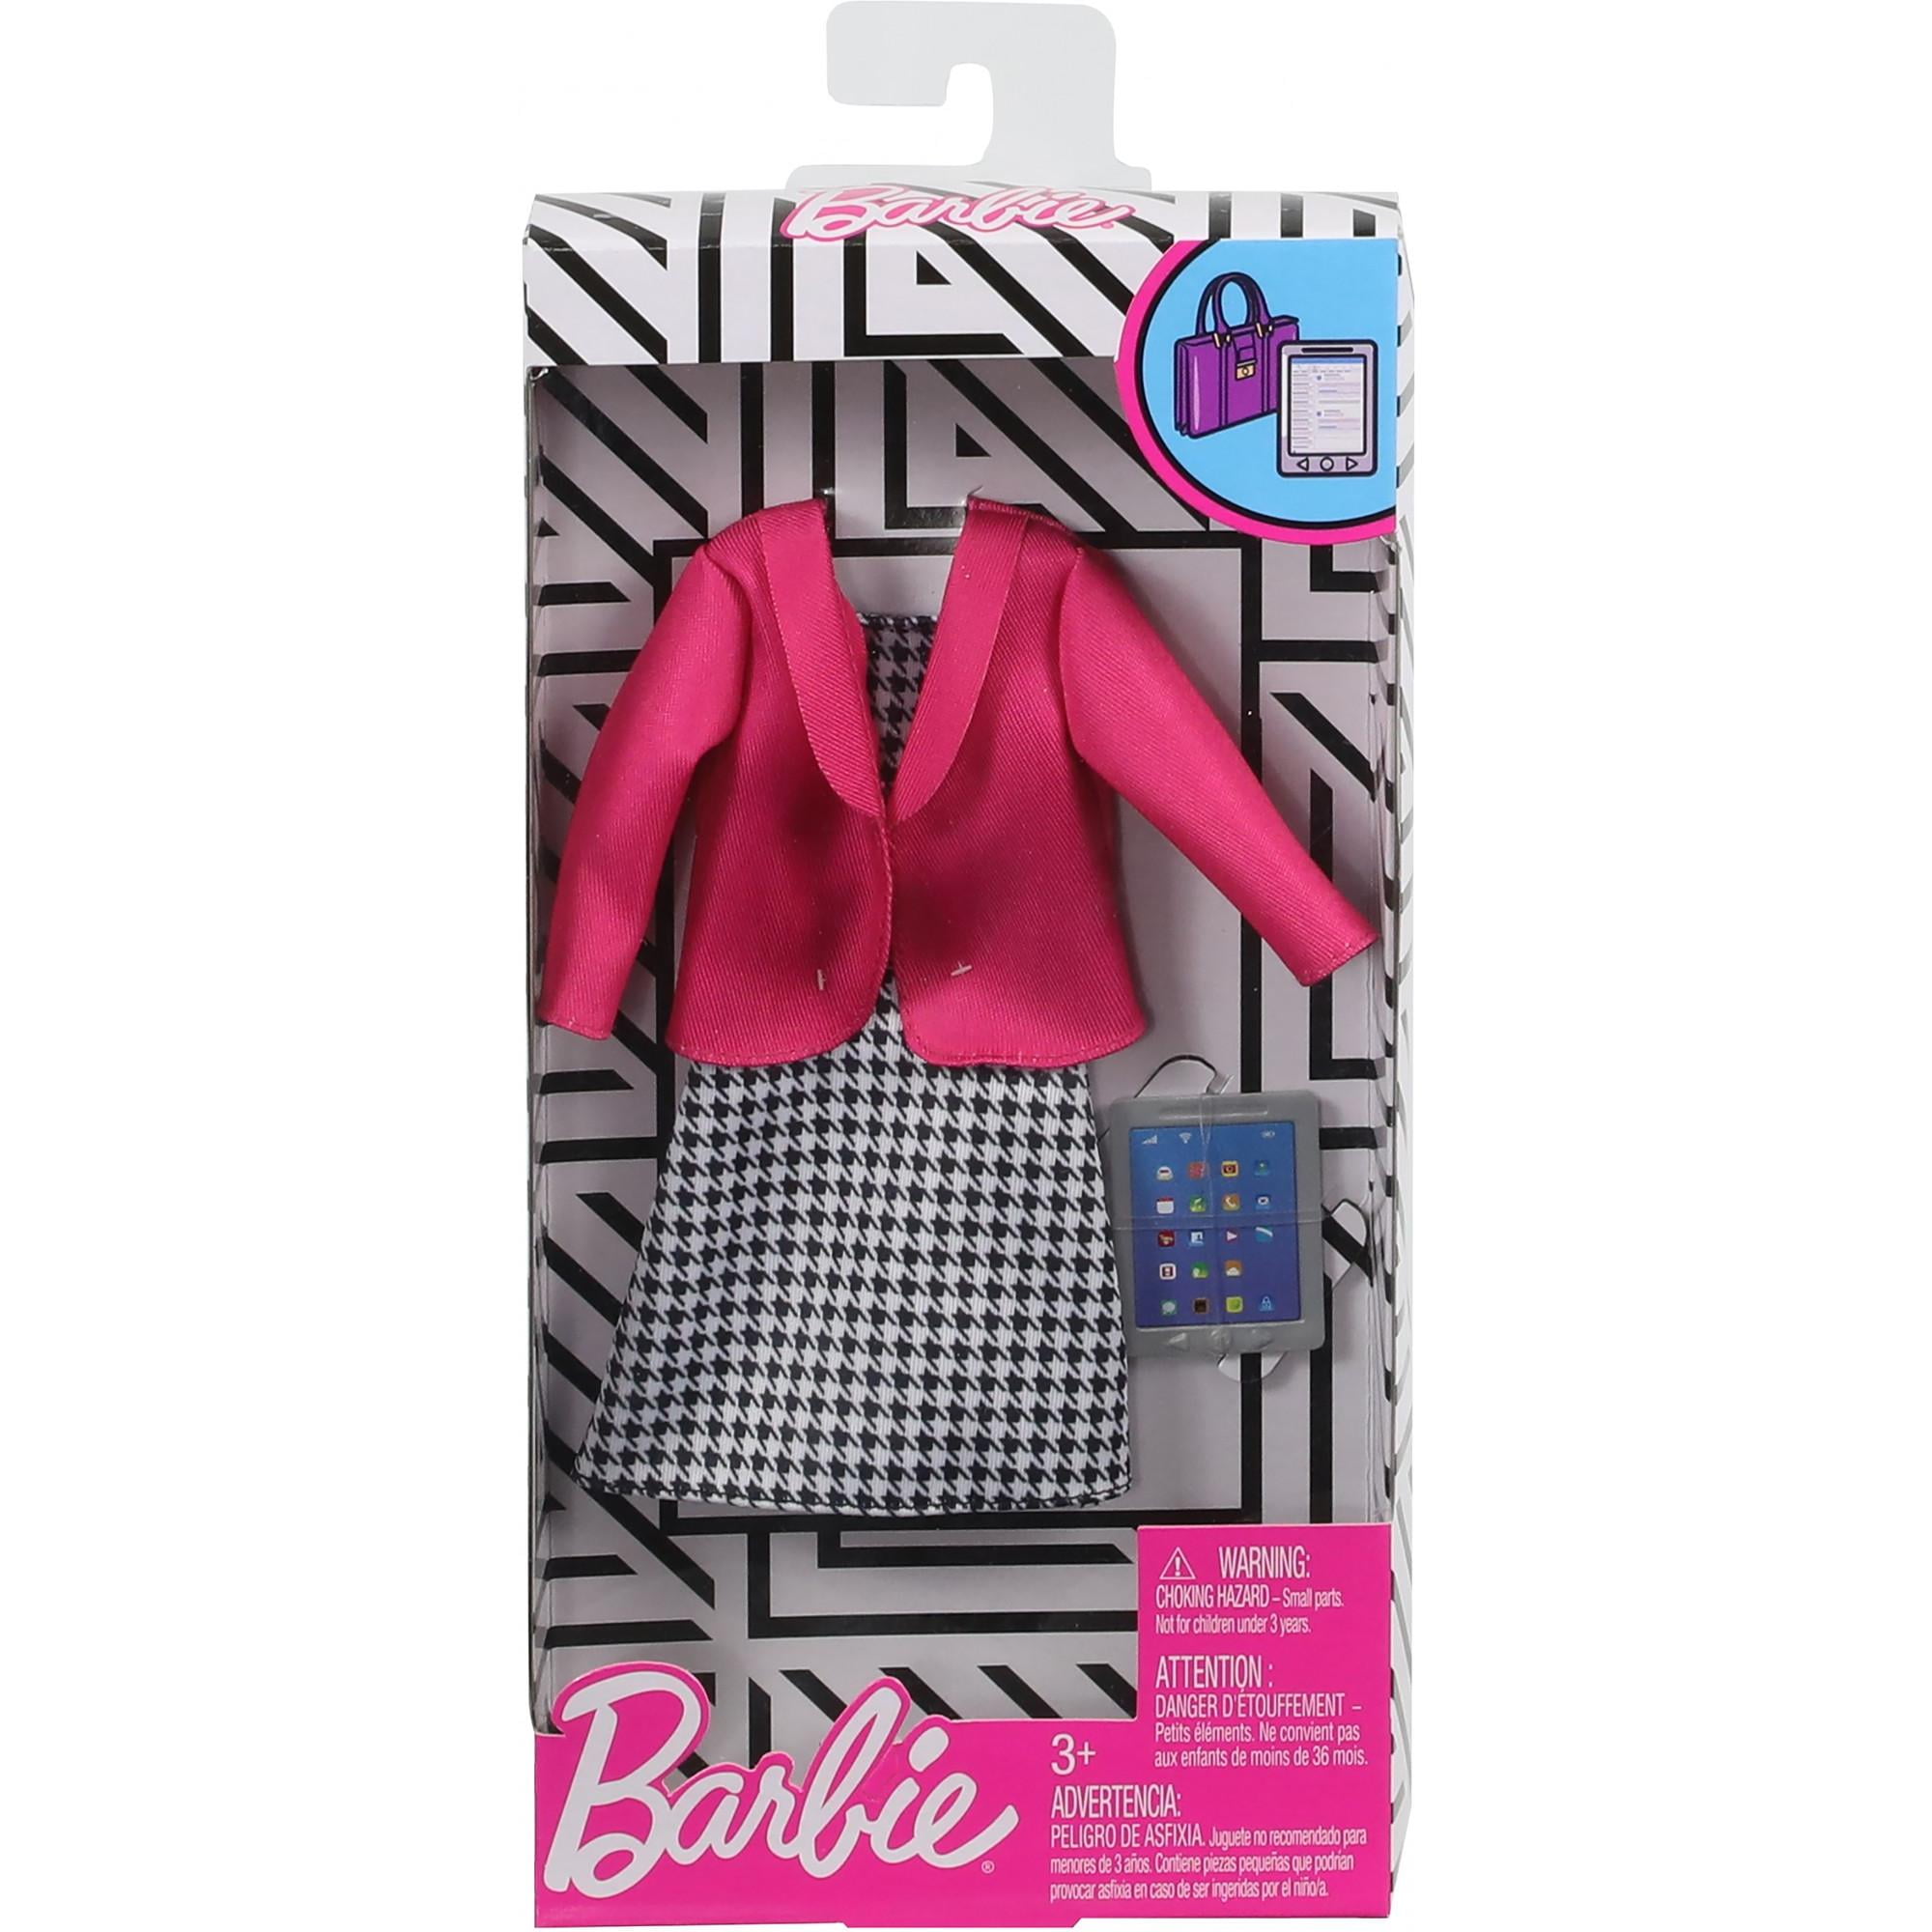 Barbie Clothes Business Executive with Tablet, Career Outfit for Barbie Doll 